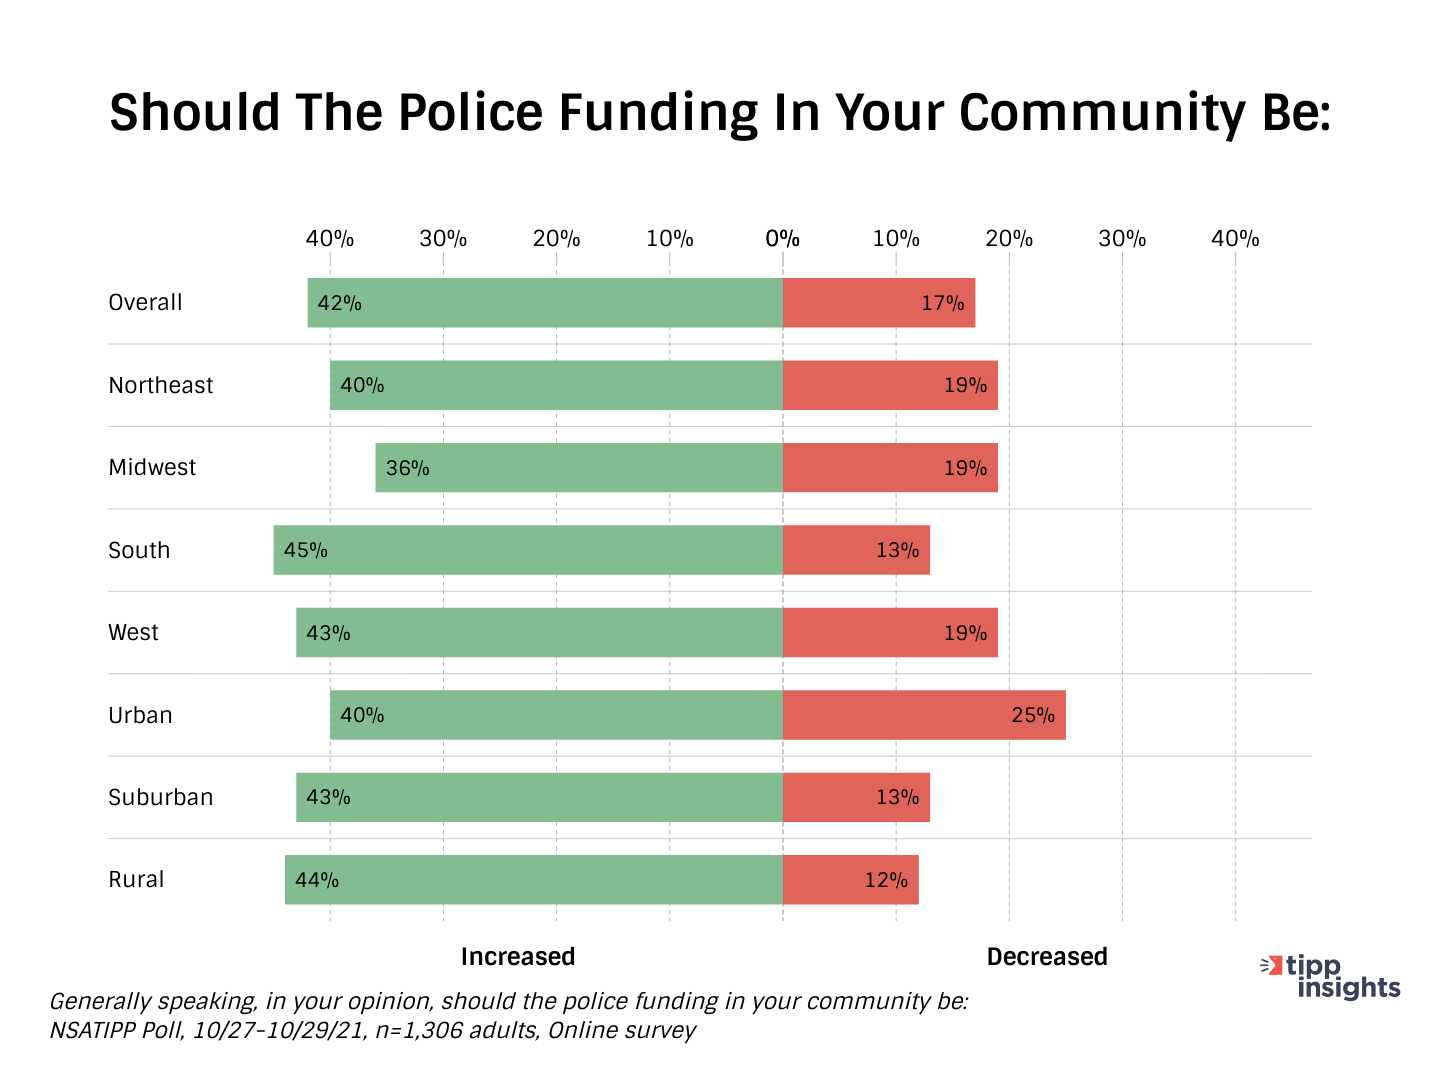 National Sheriff Associtation/TIPP Poll Results:  Should police funding be increased or decreased in American communities?